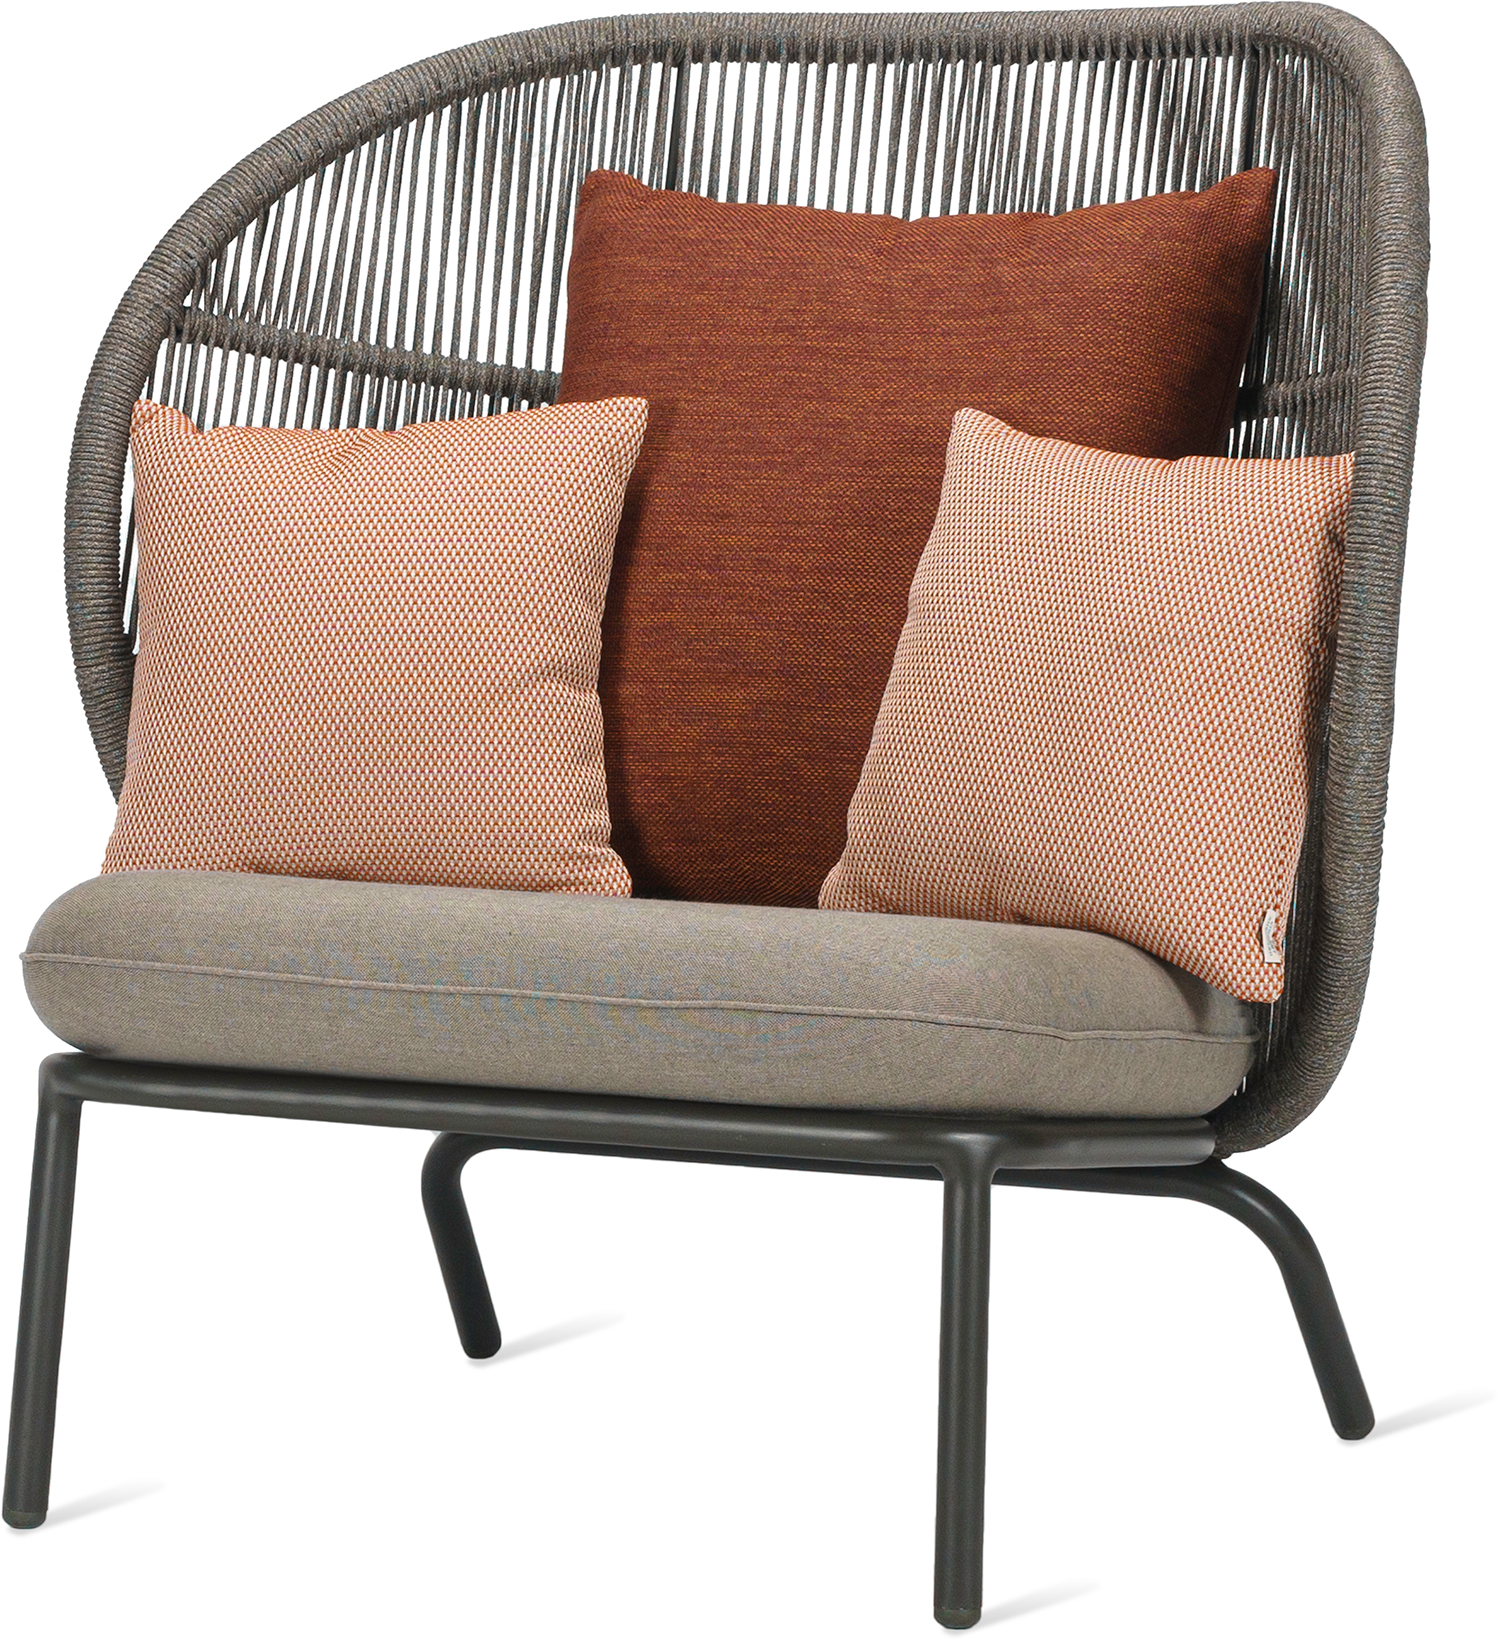 Vincent Sheppard Kodo Cocoon Fossil Grey Chair Carbon Beige